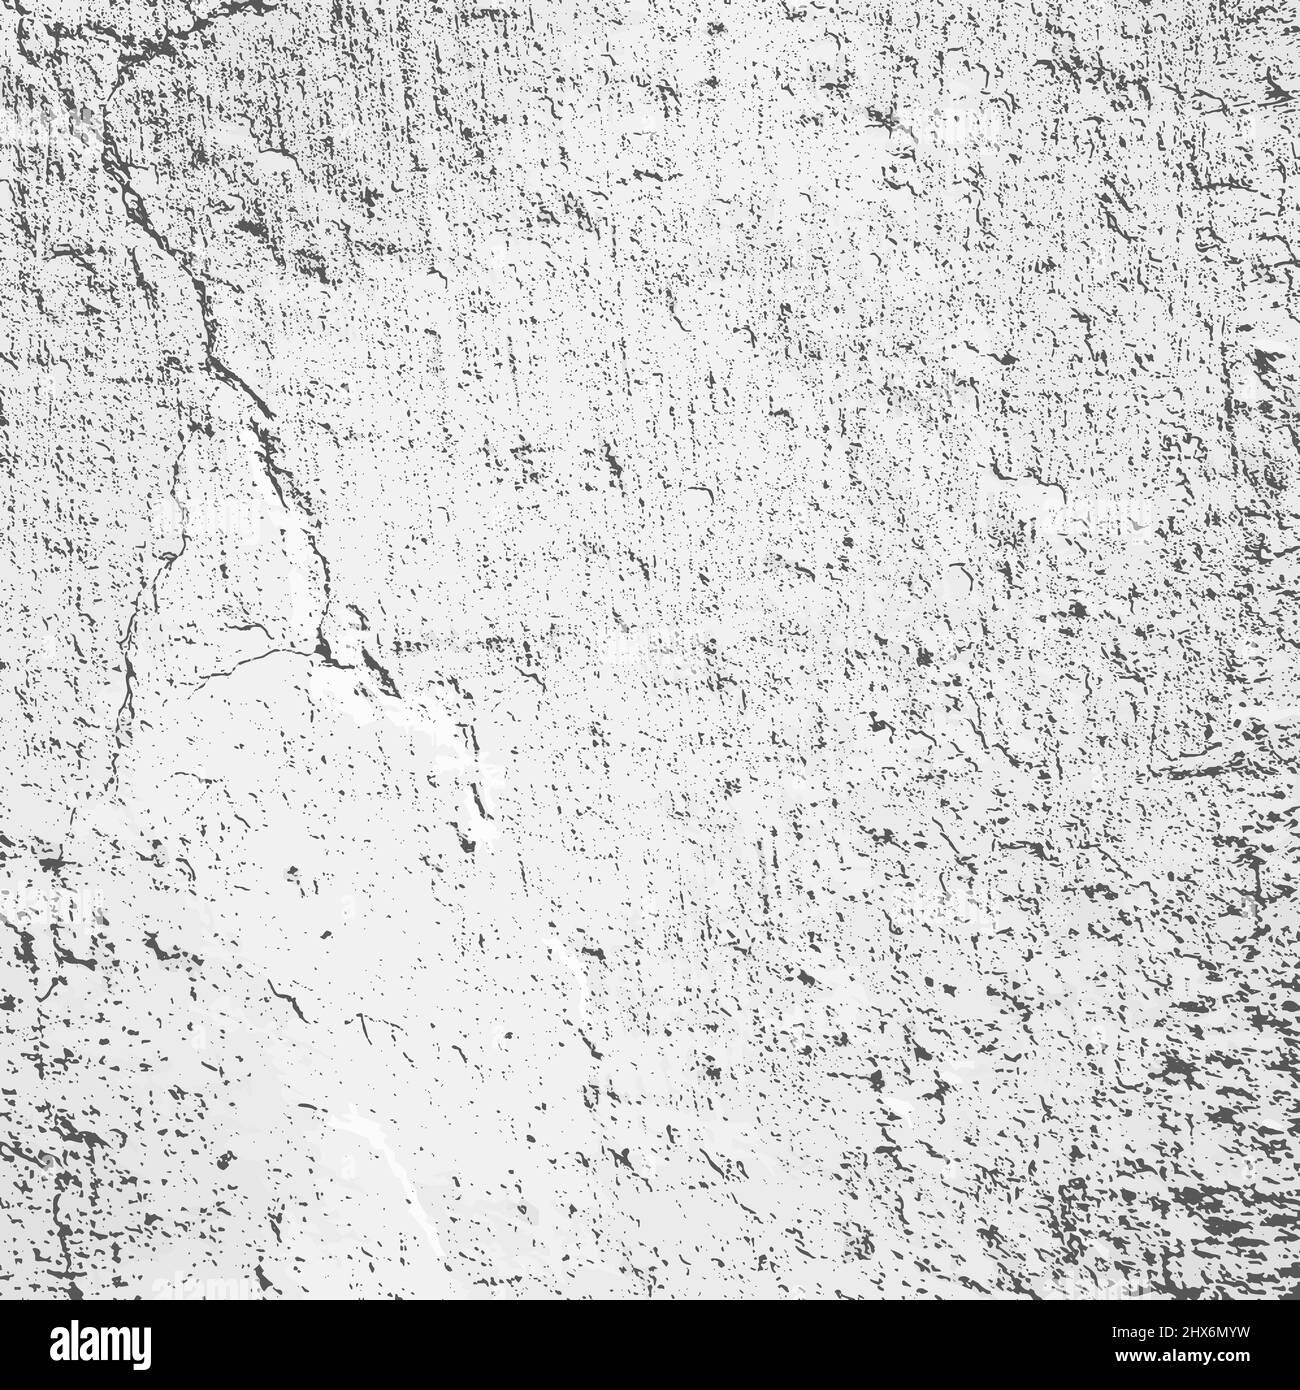 Concrete wall with cracked white clay coating Stock Photo